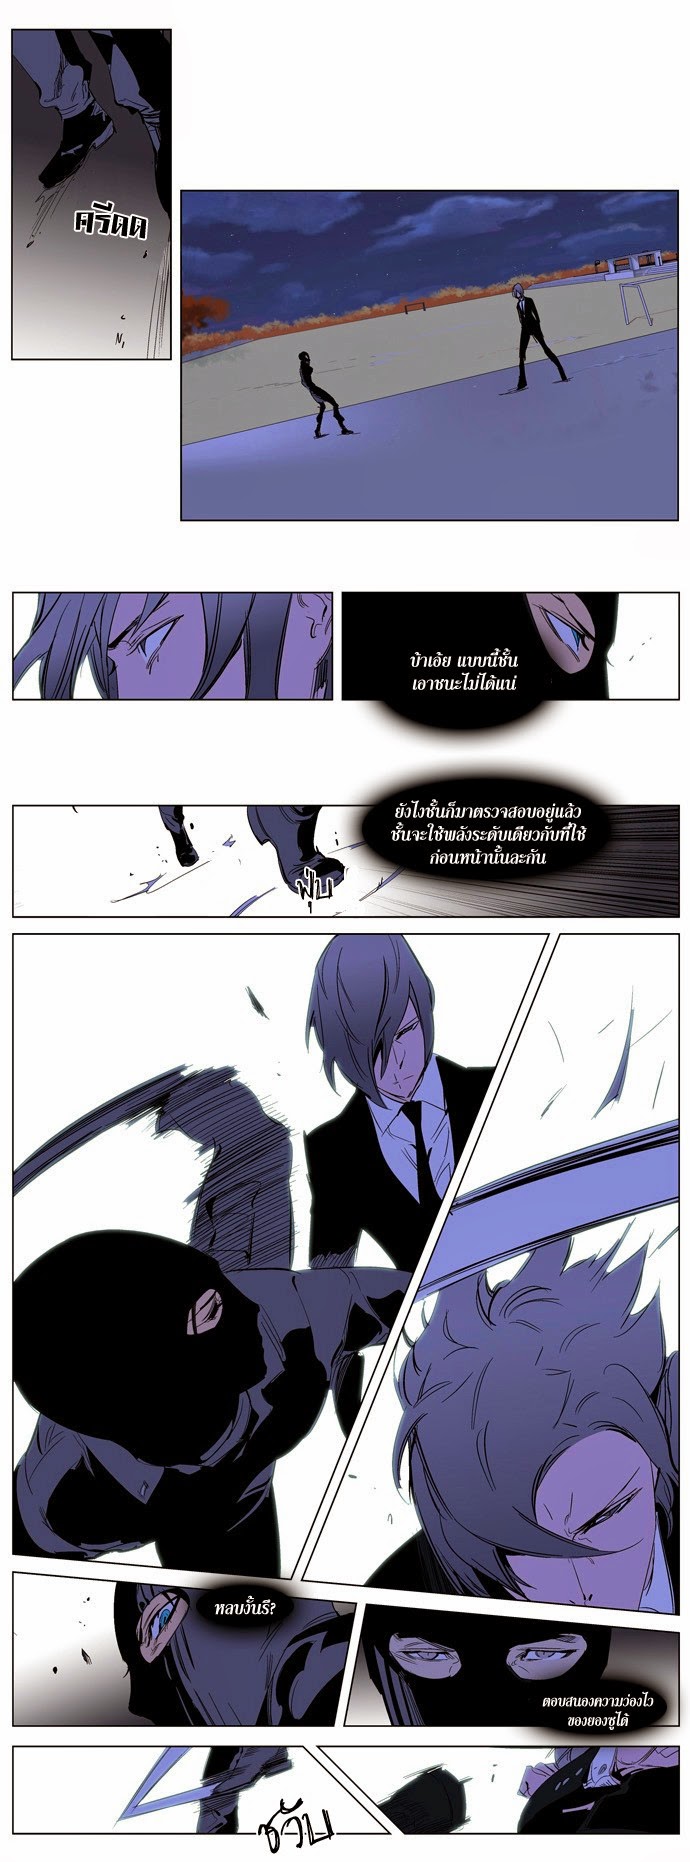 Noblesse 216 009